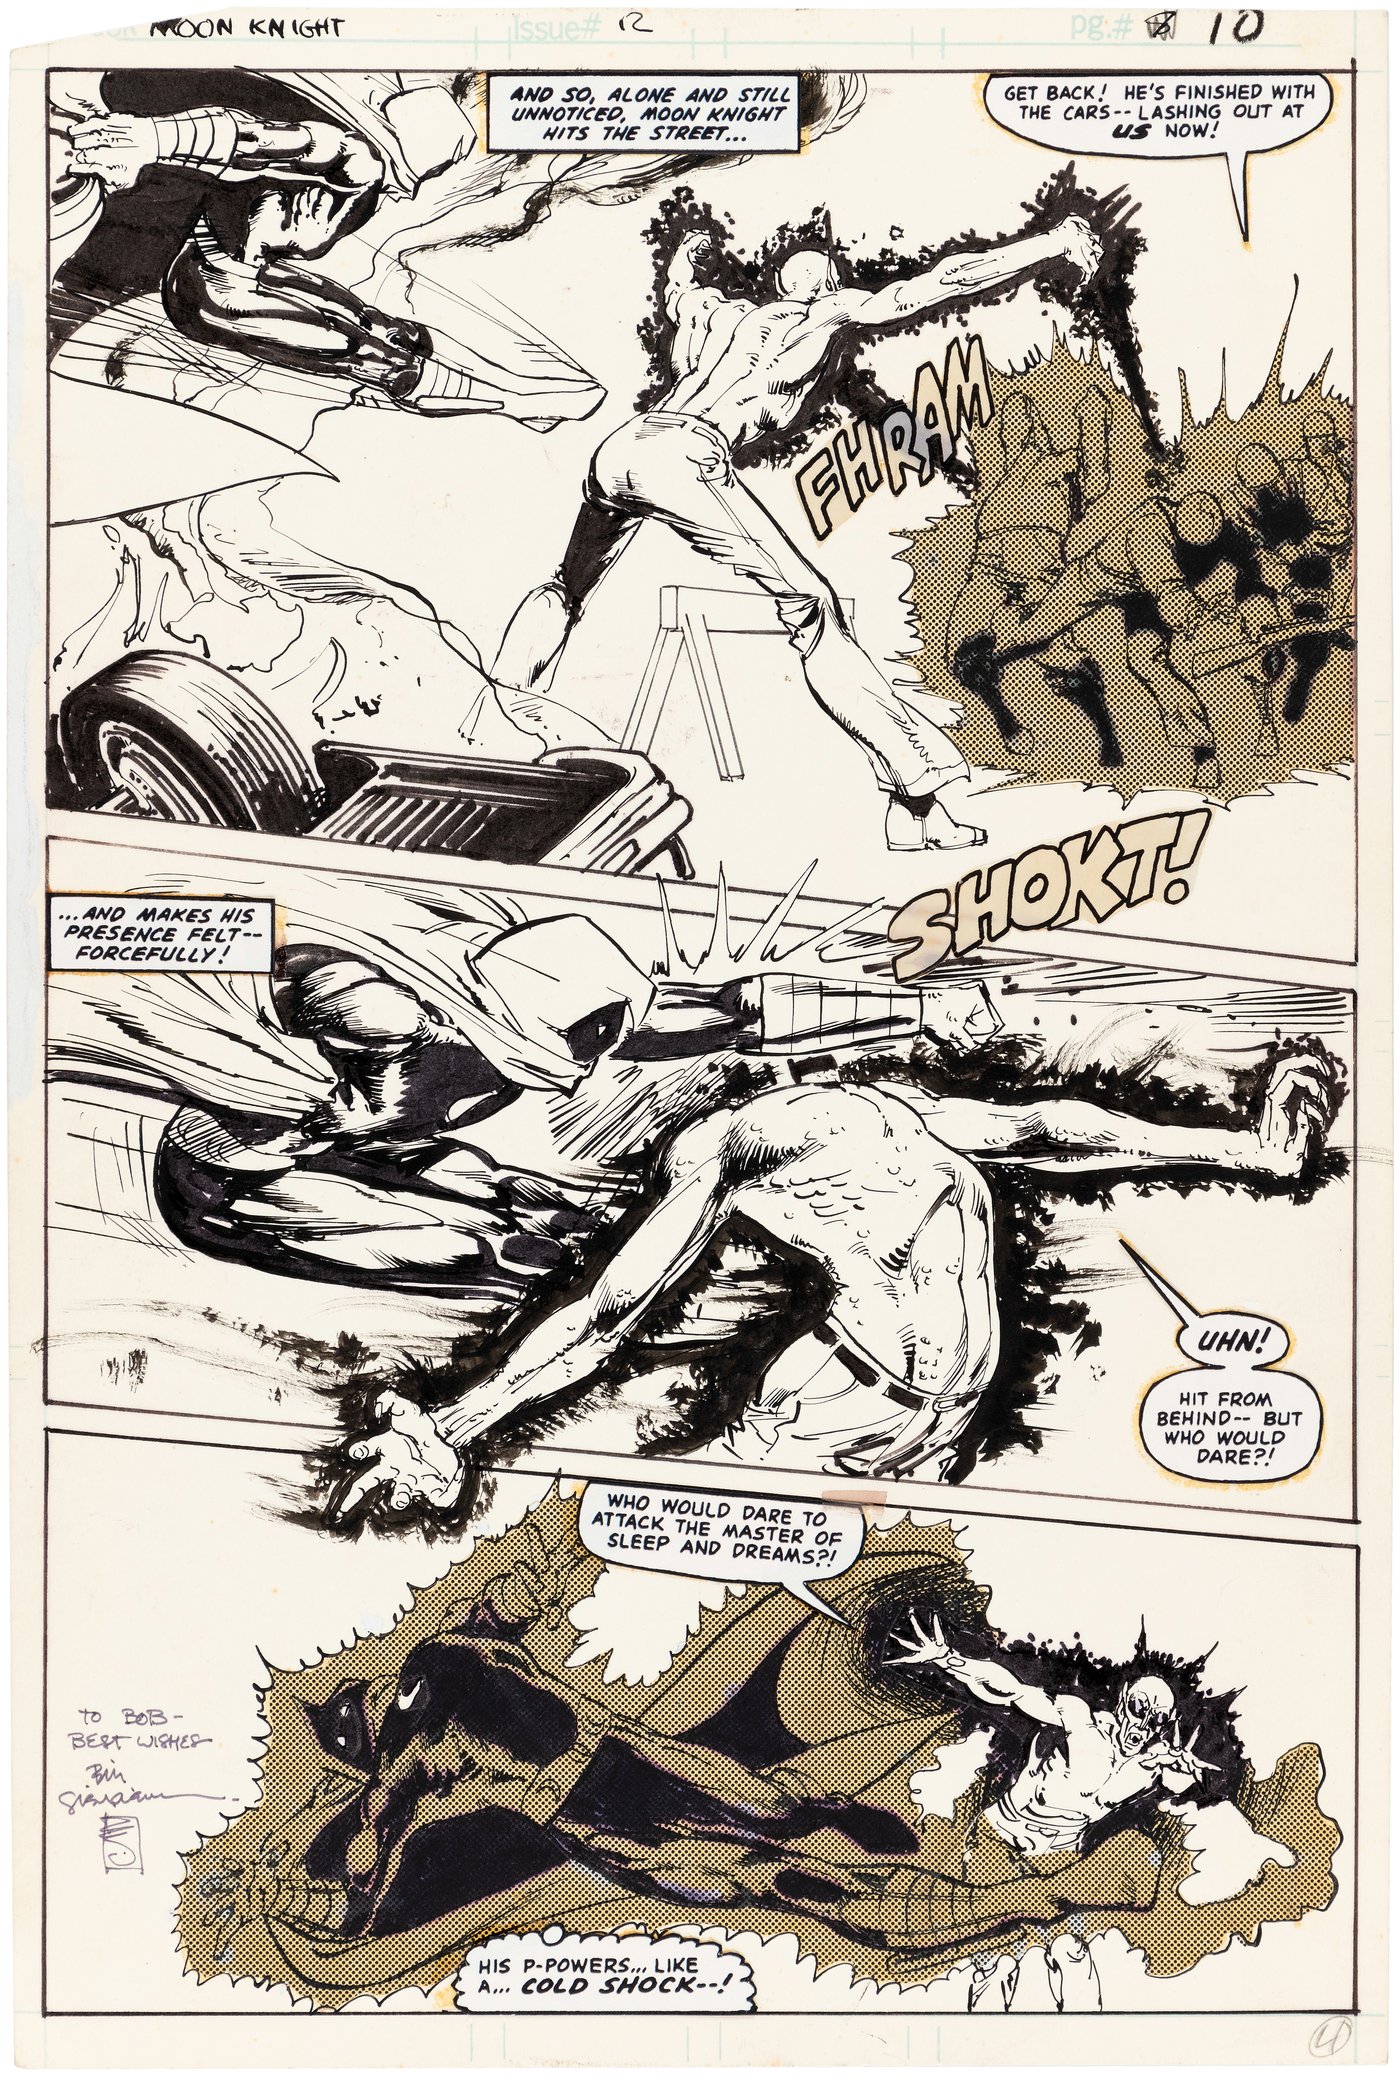 Moon Knight Archives - Page 2 of 3 - Bounding Into Comics